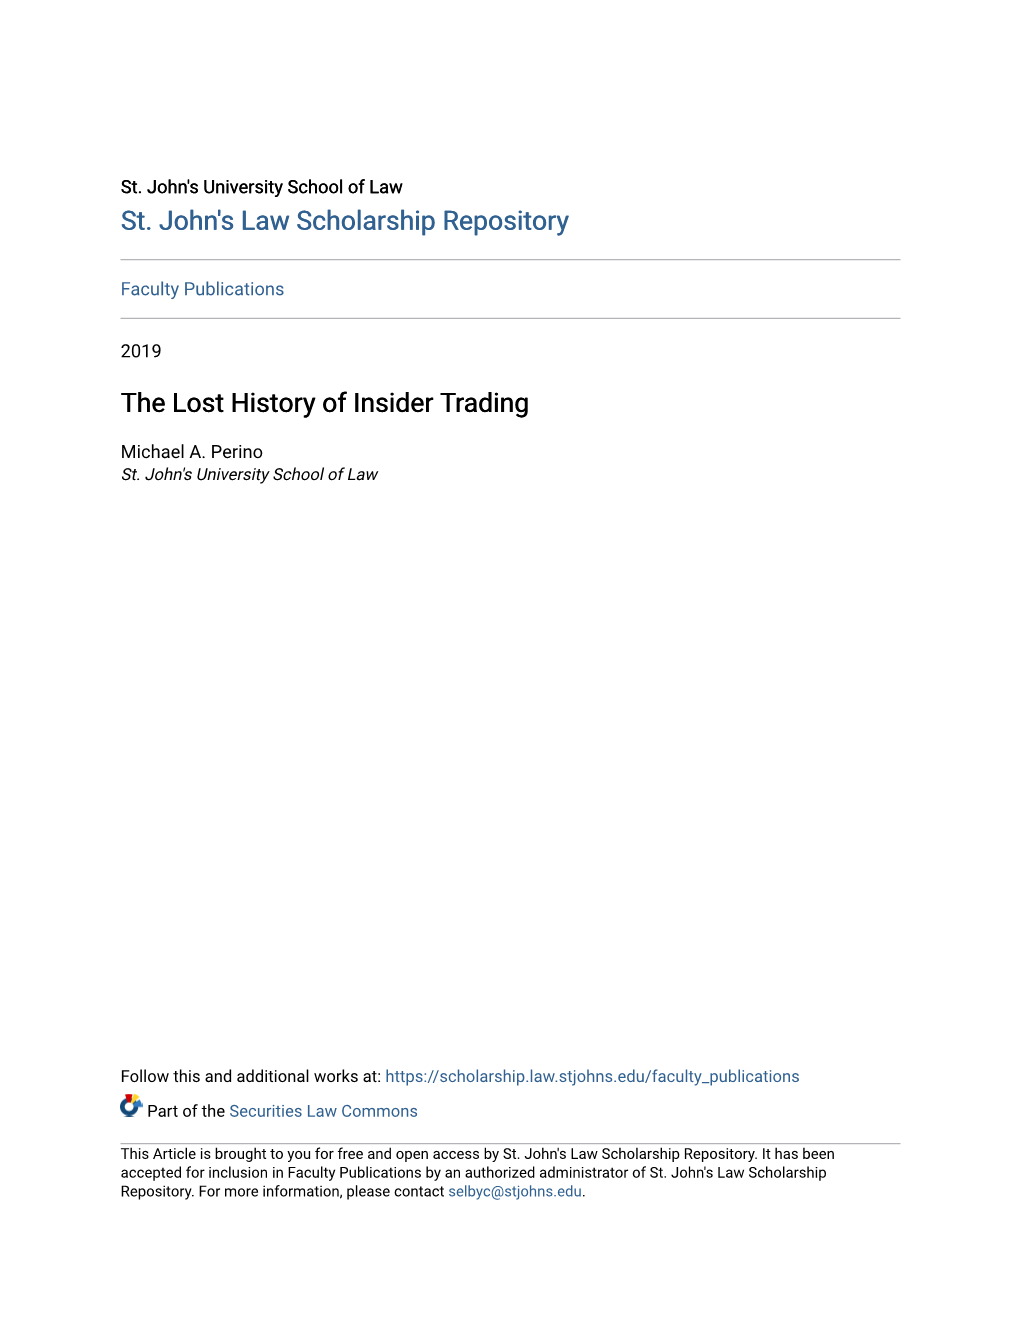 The Lost History of Insider Trading